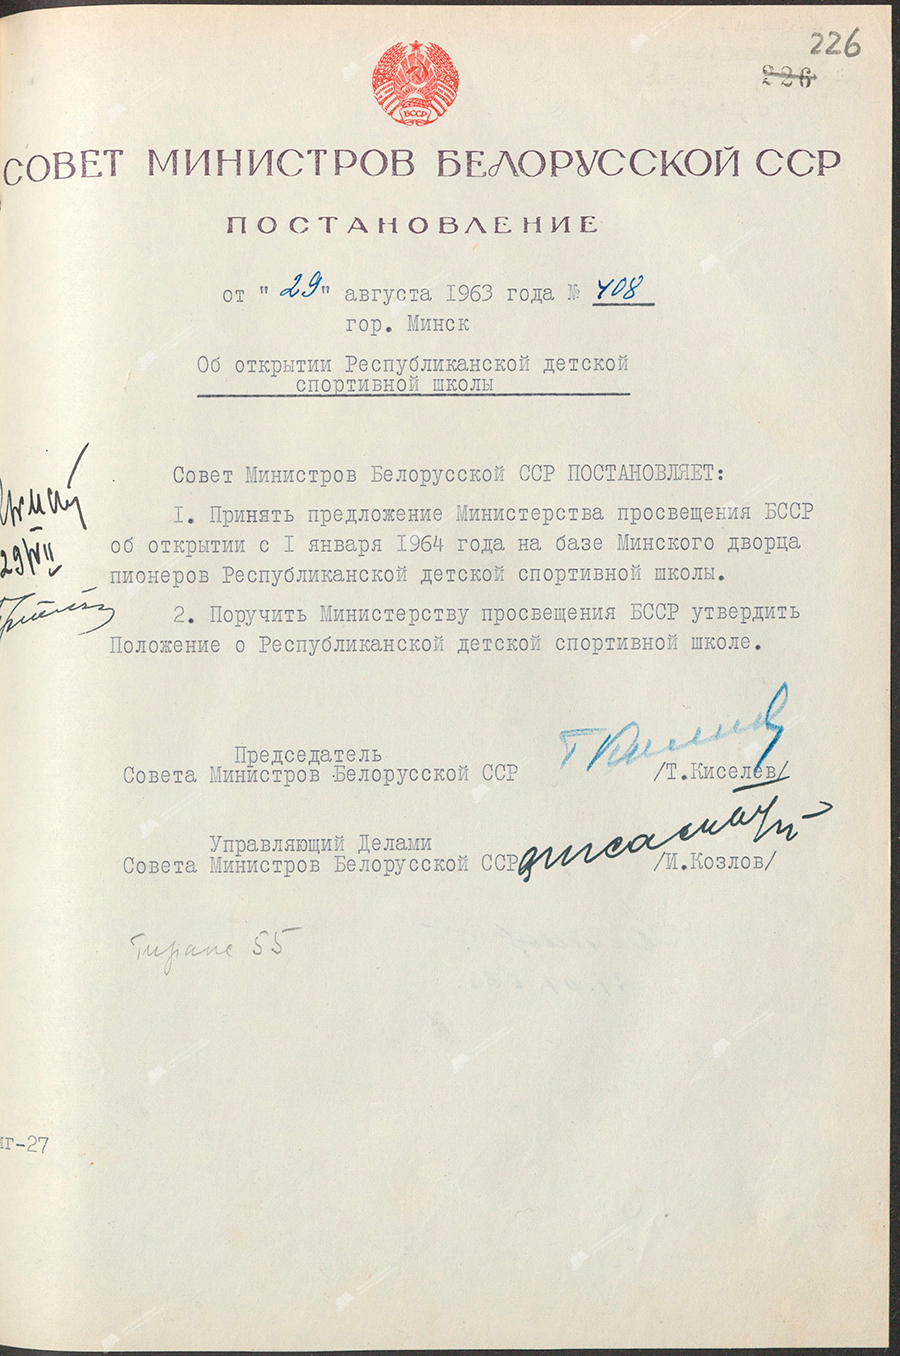 Resolution No. 408 of the Council of Ministers of the BSSR «On the opening of the Republican children’s sports school»-с. 0